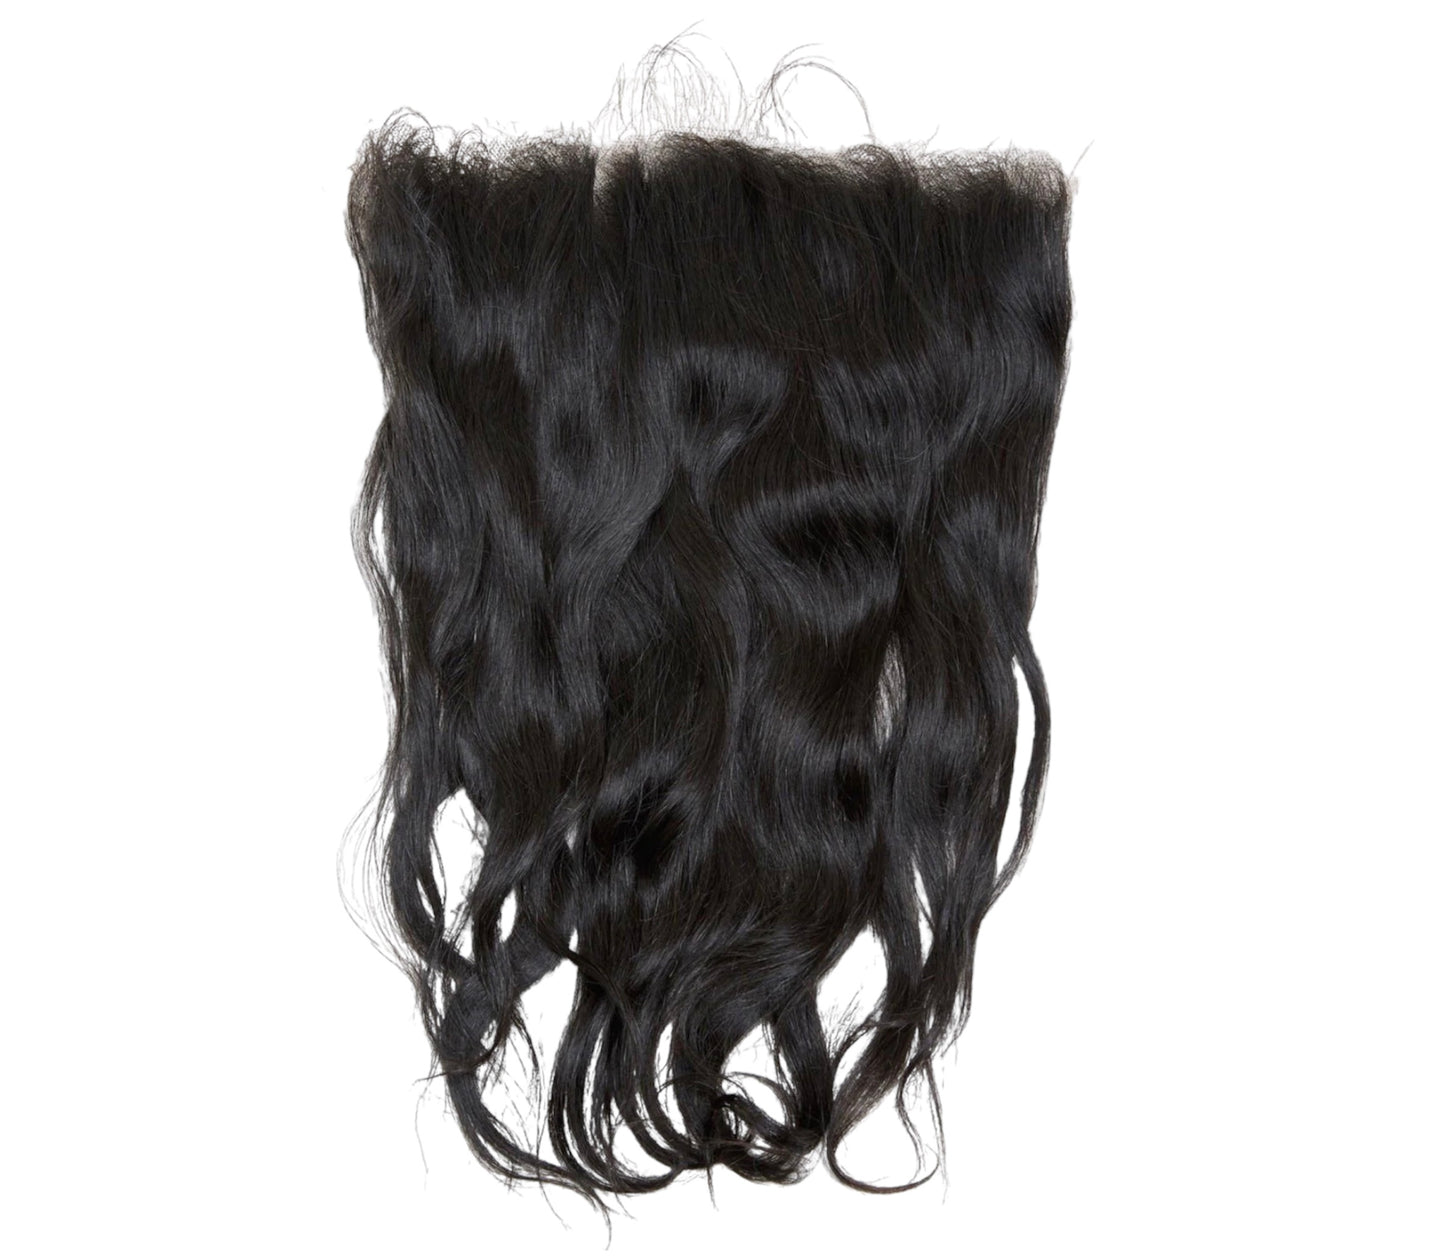 RAW HAIR 13X6 FRONTALS